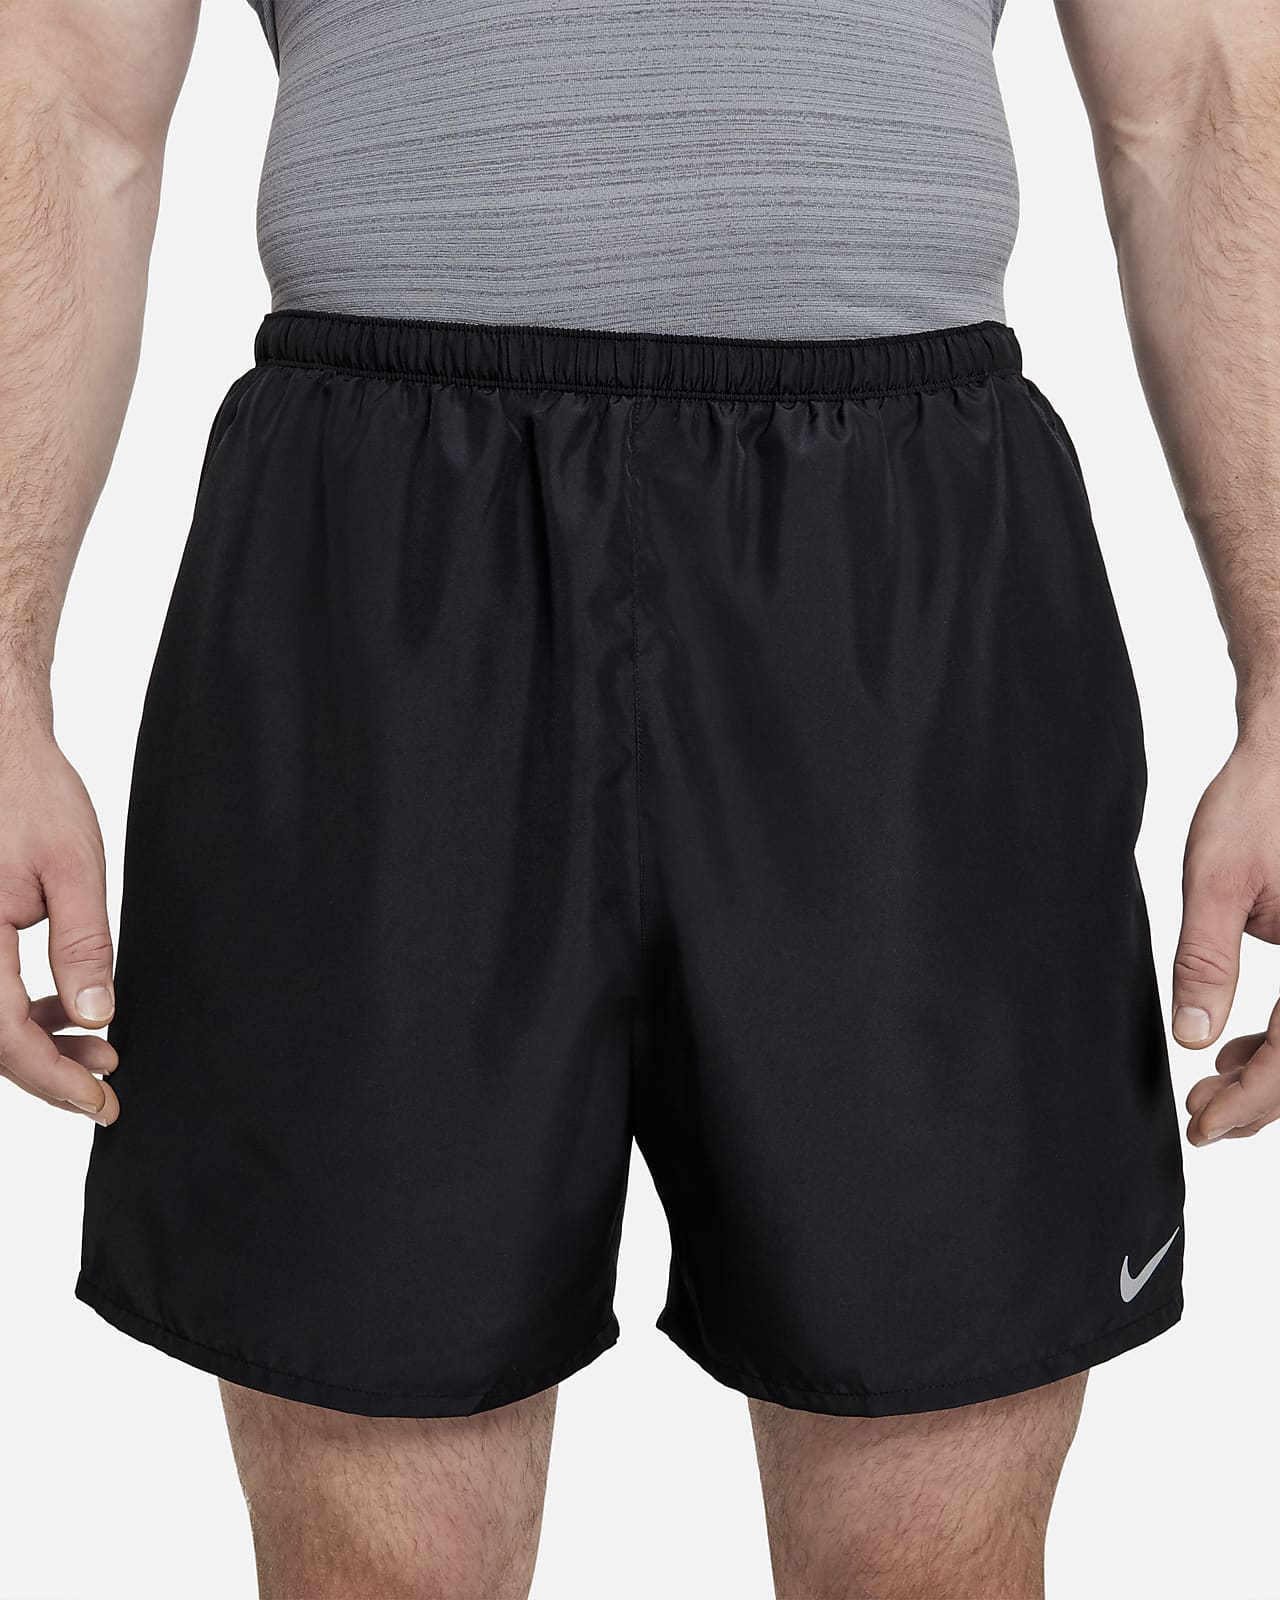 The best running shorts for men, by Nike. Nike CA